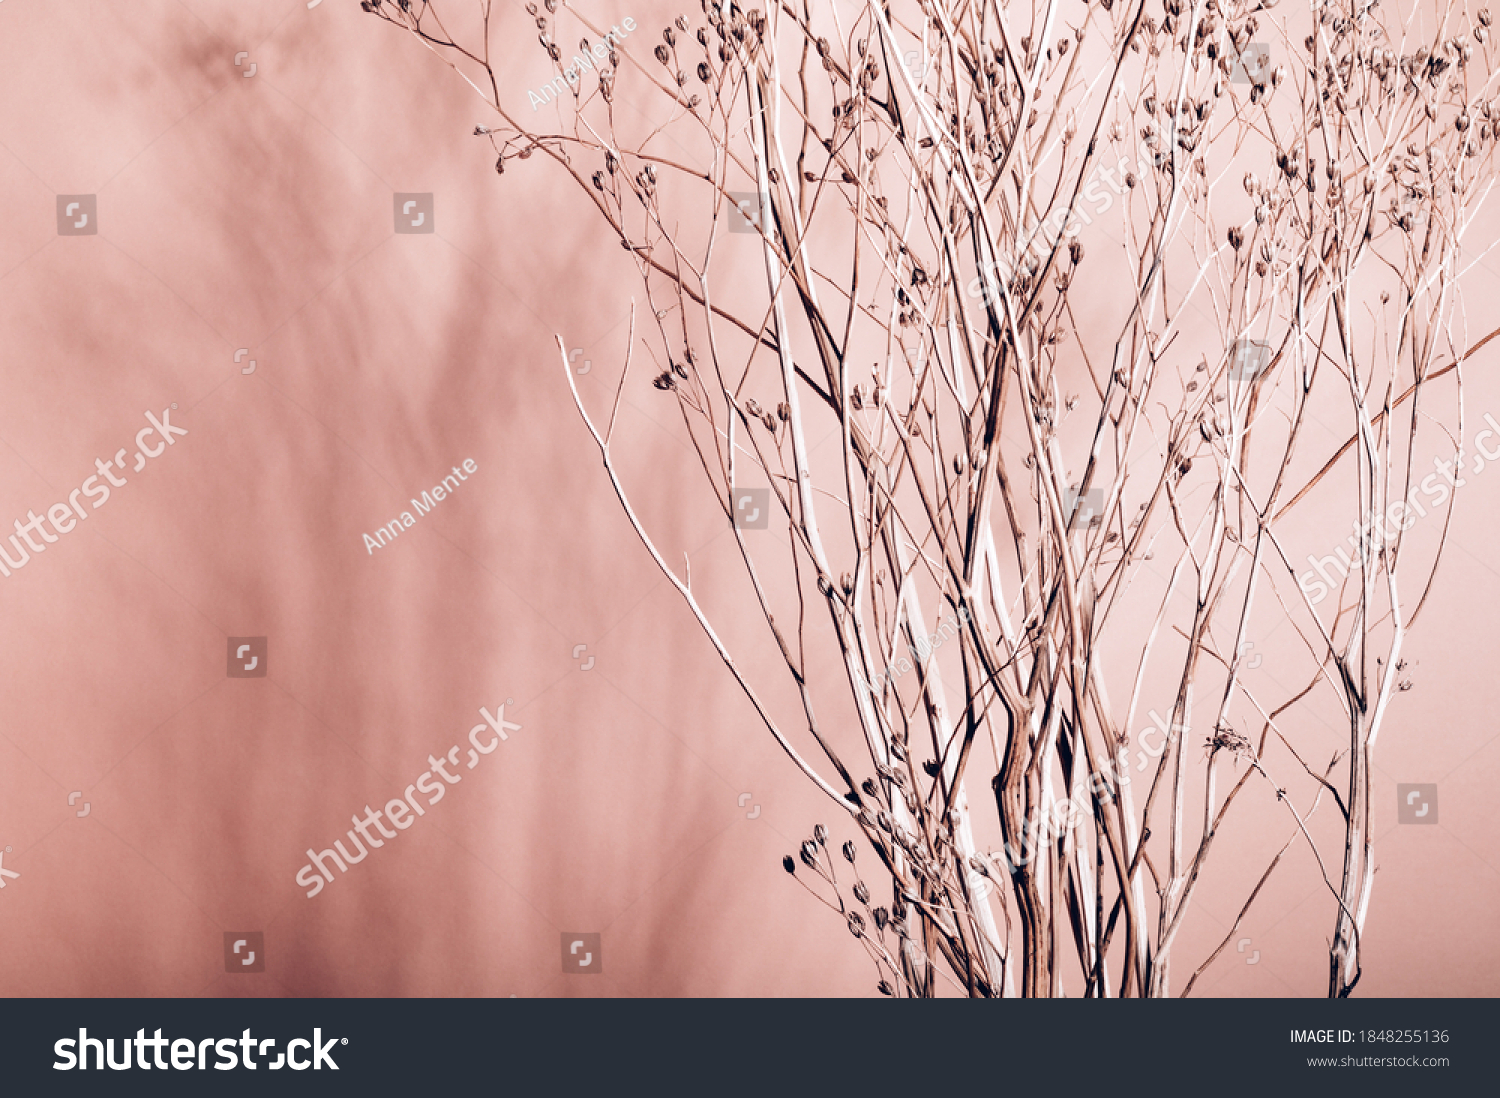 Home interior floral decor from natural dry flowers or twigs. Strong shadows on pink background #1848255136